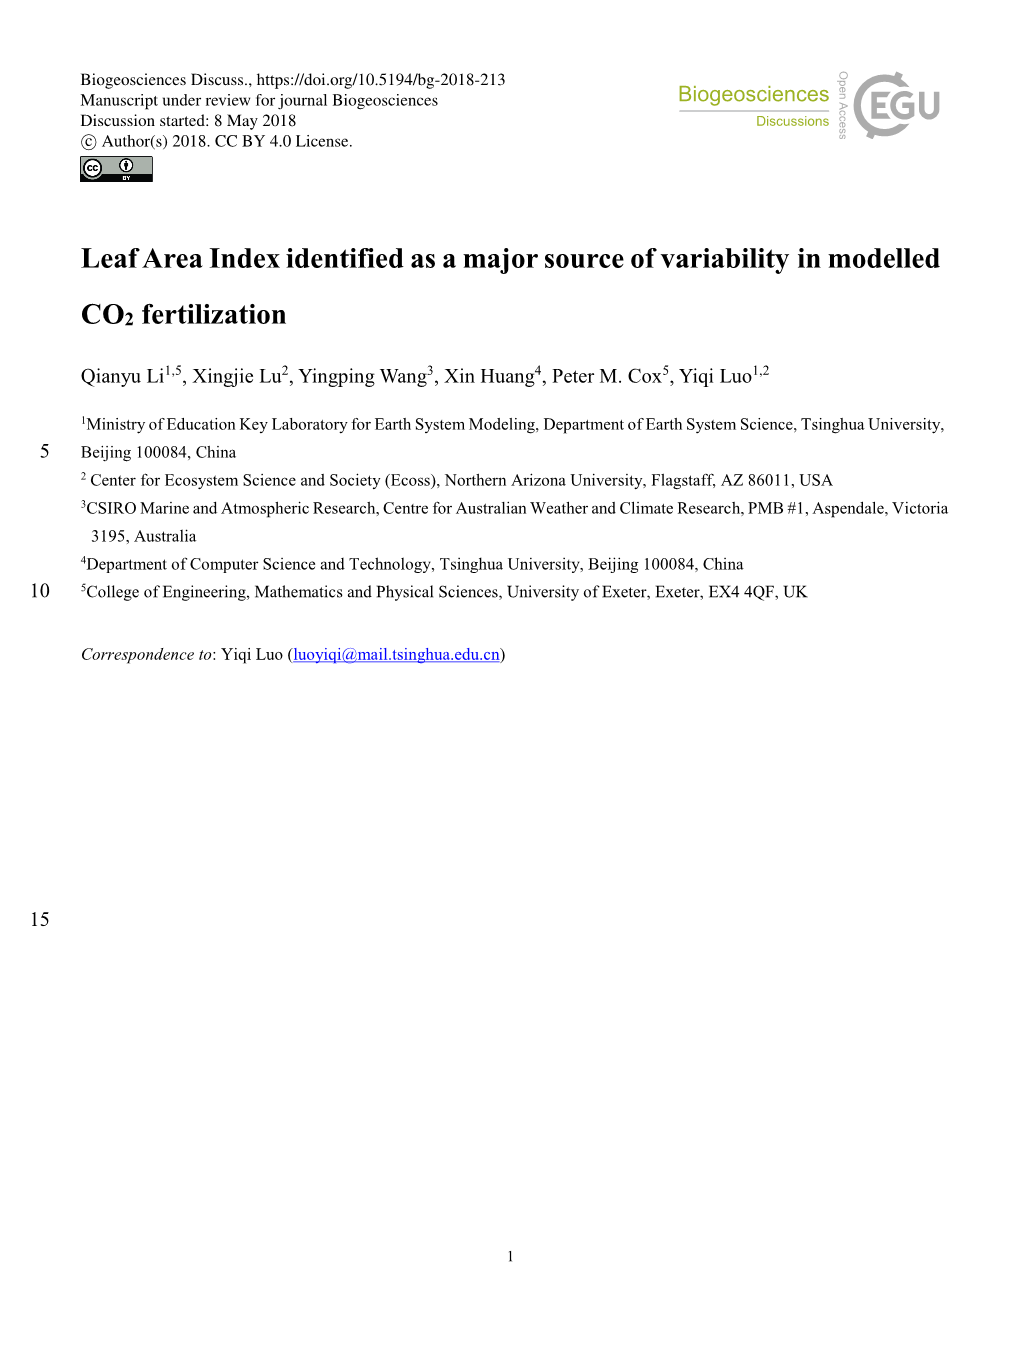 Leaf Area Index Identified As a Major Source of Variability in Modelled